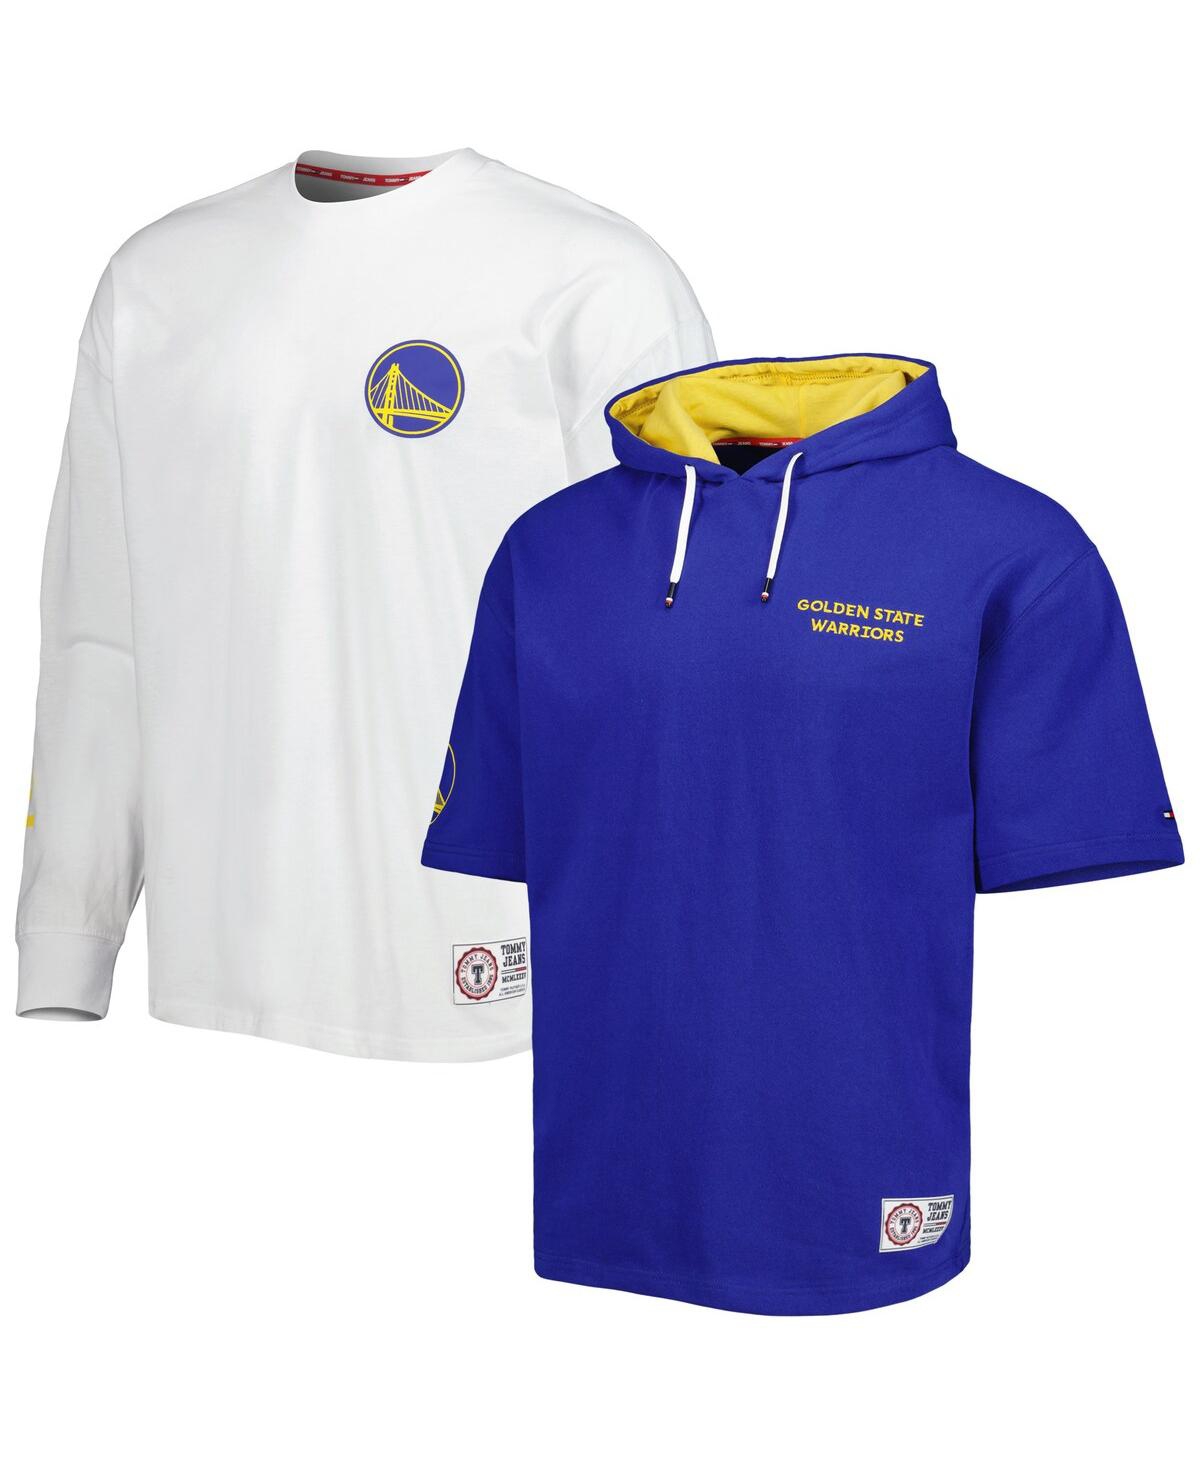 TOMMY JEANS MEN'S TOMMY JEANS ROYAL, WHITE GOLDEN STATE WARRIORS MATTHEW 2 IN 1 T-SHIRT AND HOODIE COMBO SET